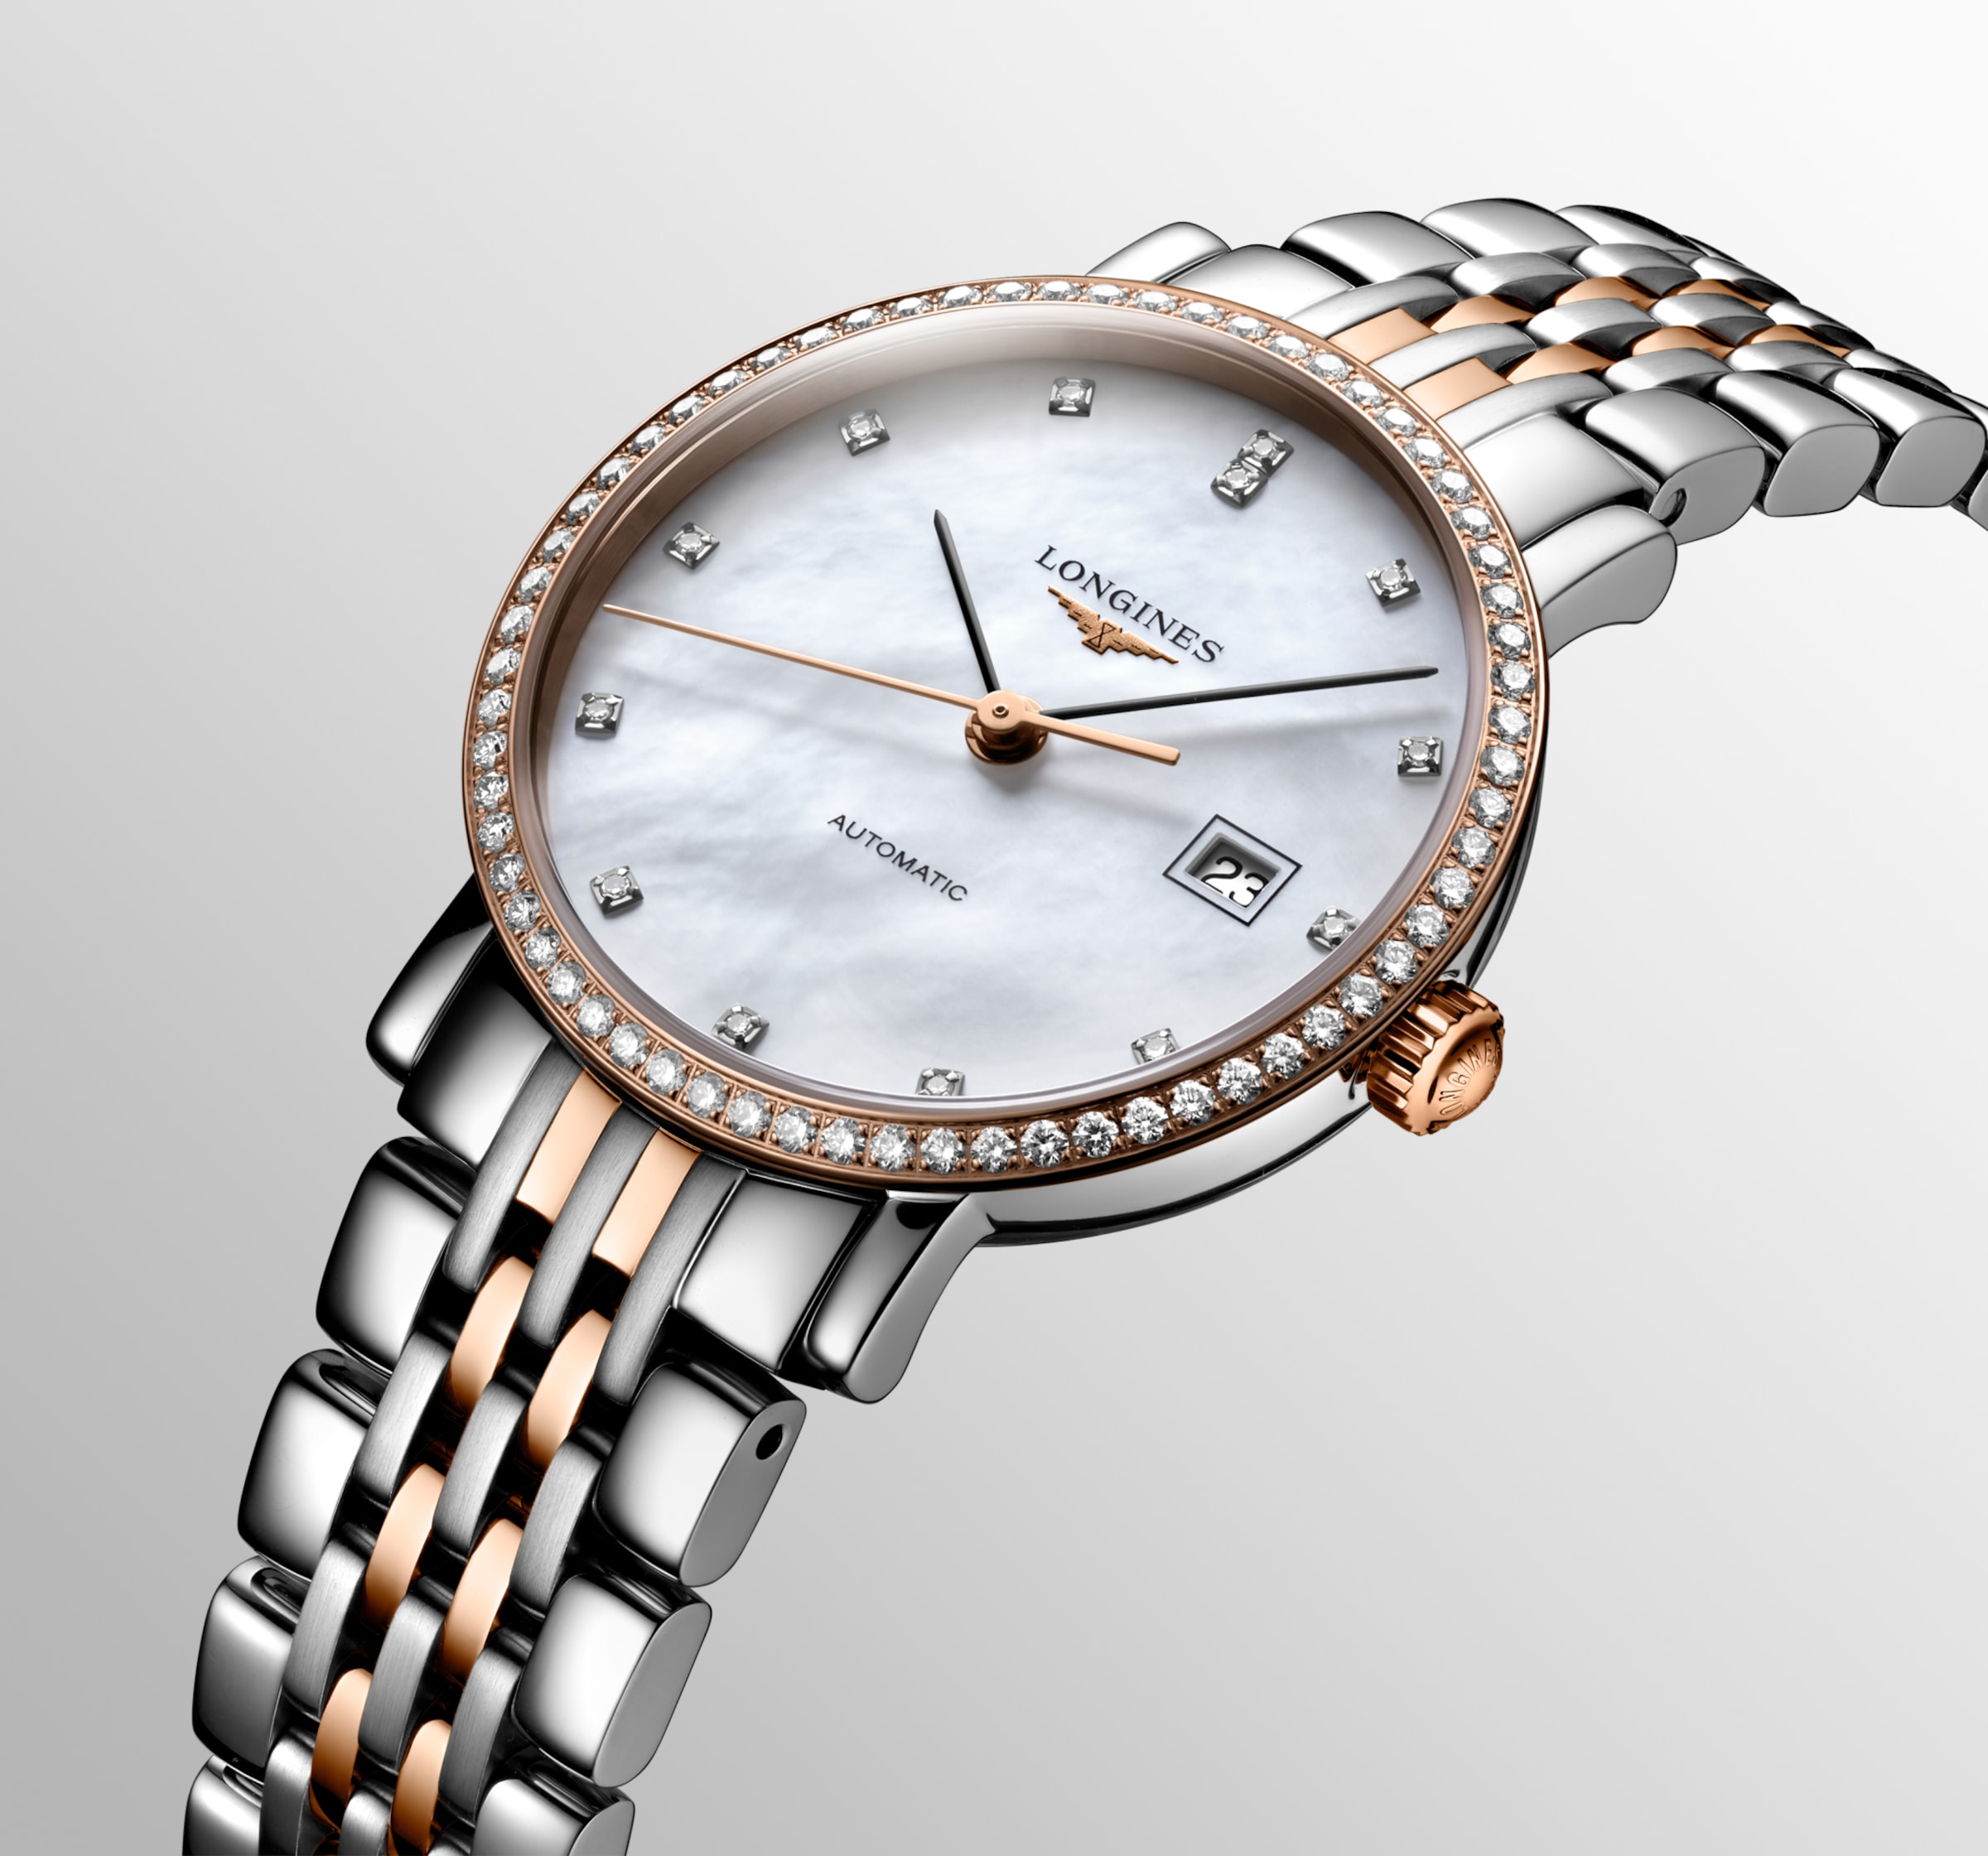 Longines ELEGANT COLLECTION Automatic Stainless steel and 18 karat pink gold Watch - L4.310.5.88.7